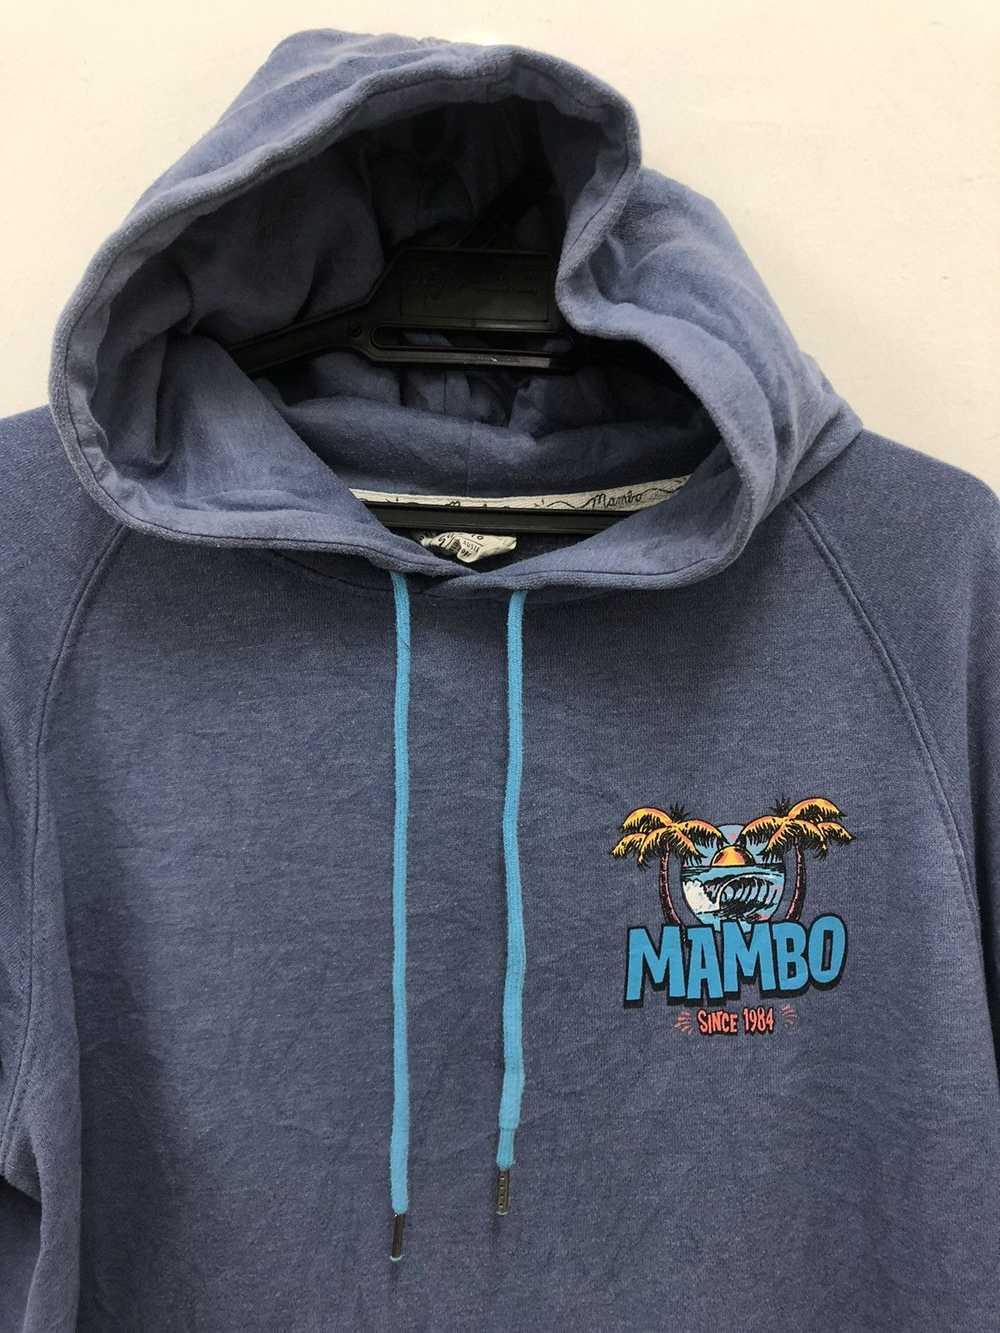 Mambo Rare MAMBO Spell Out Big Logo Hooded Sweater - image 2